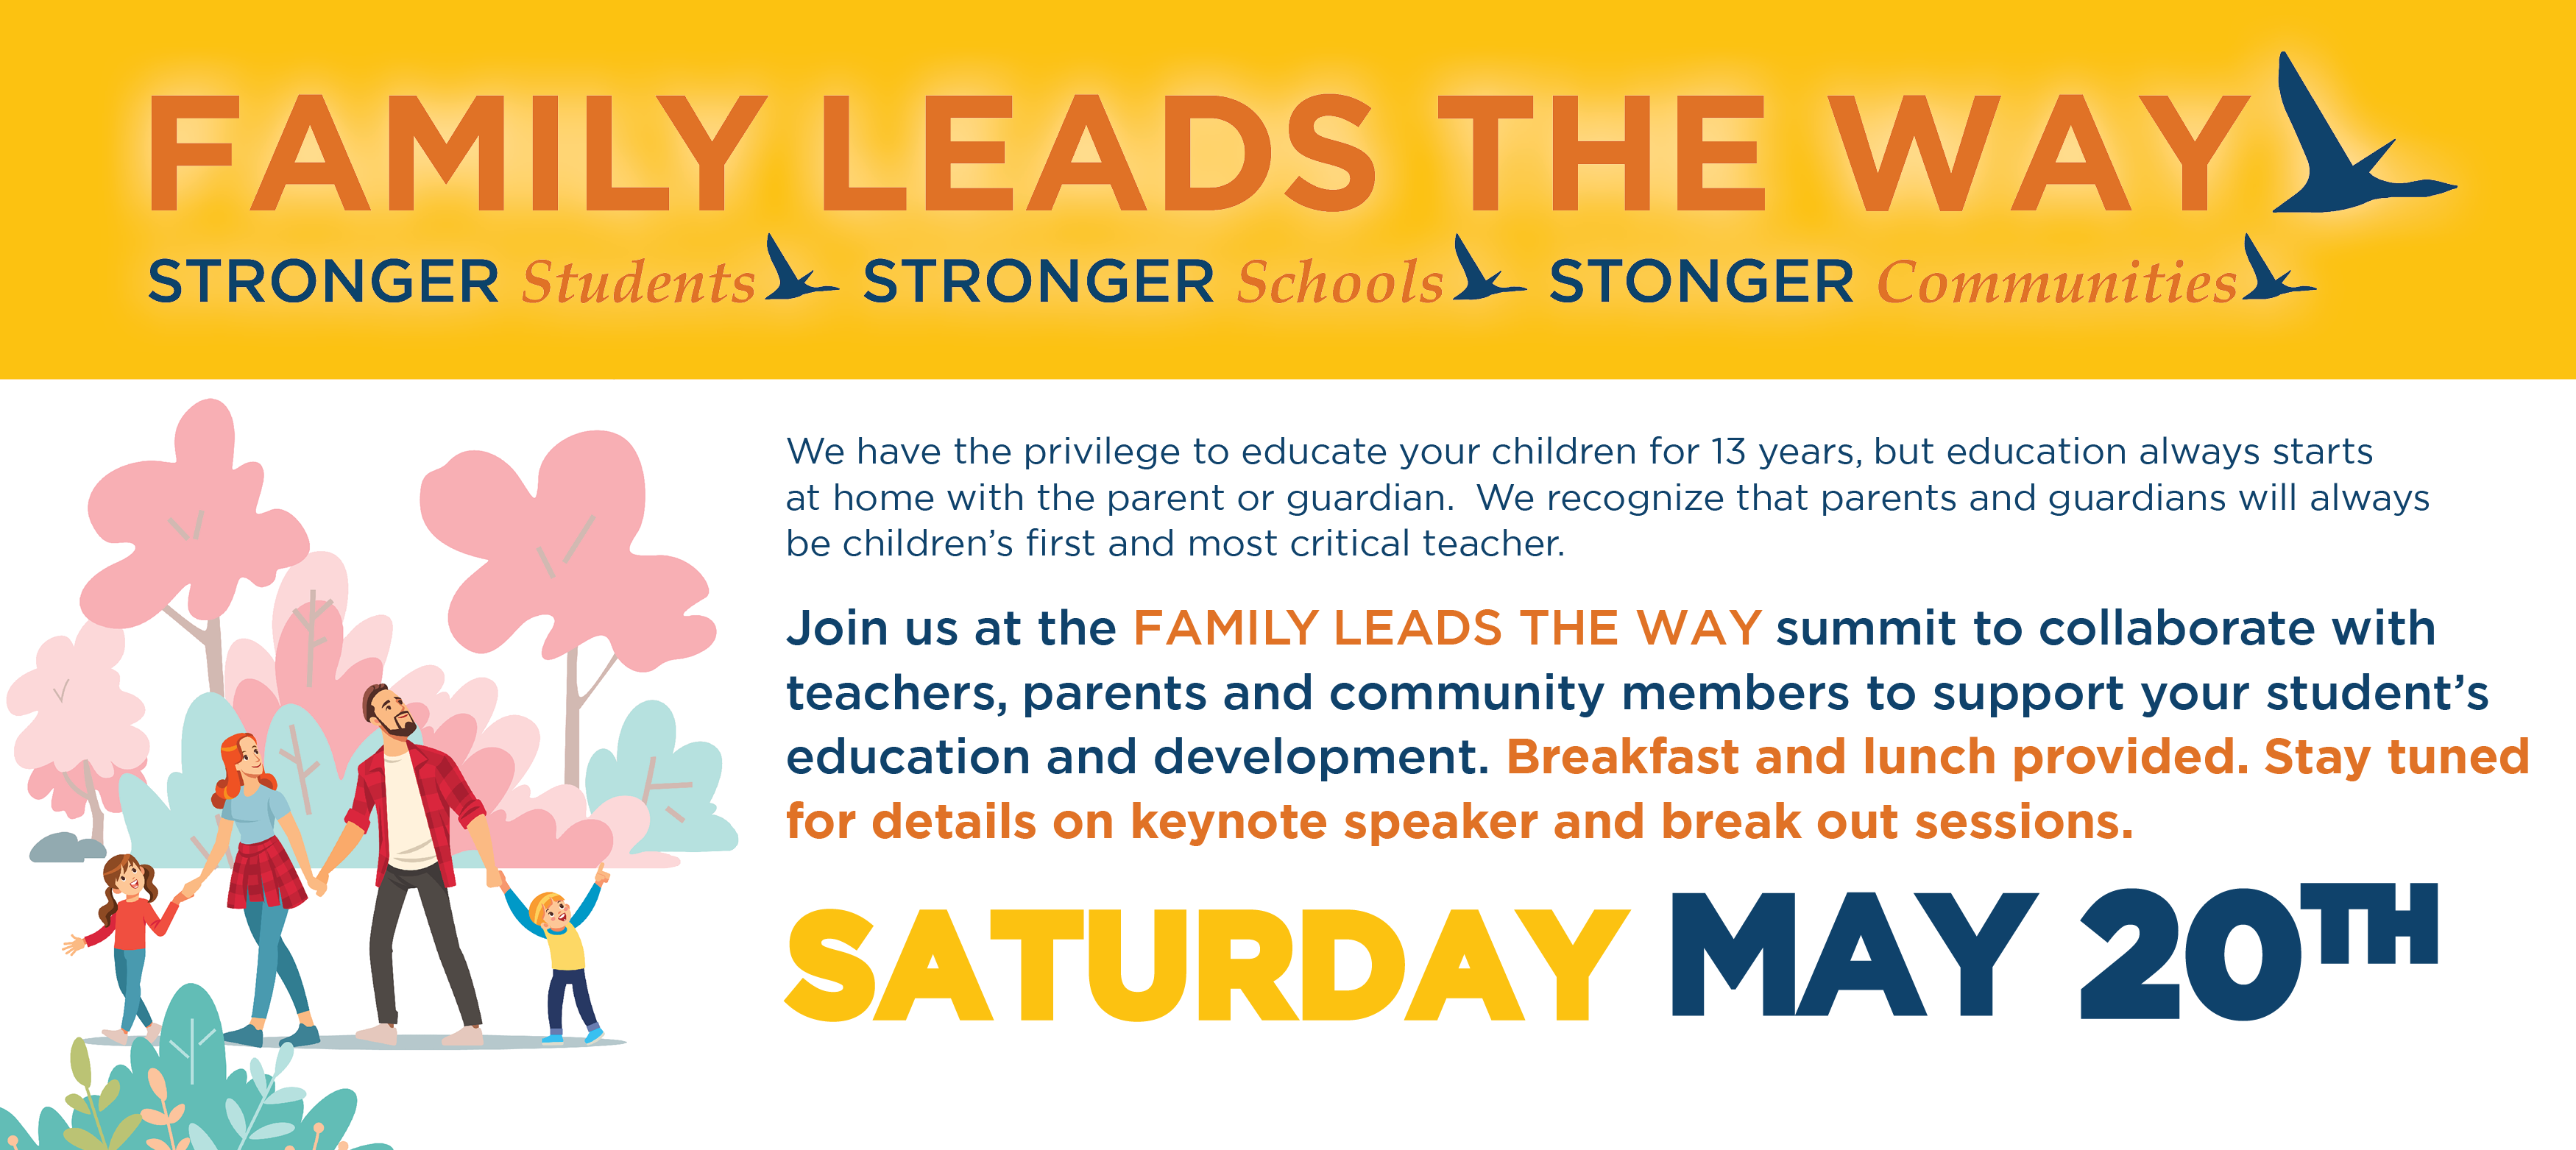 Family leads the way summit May 20